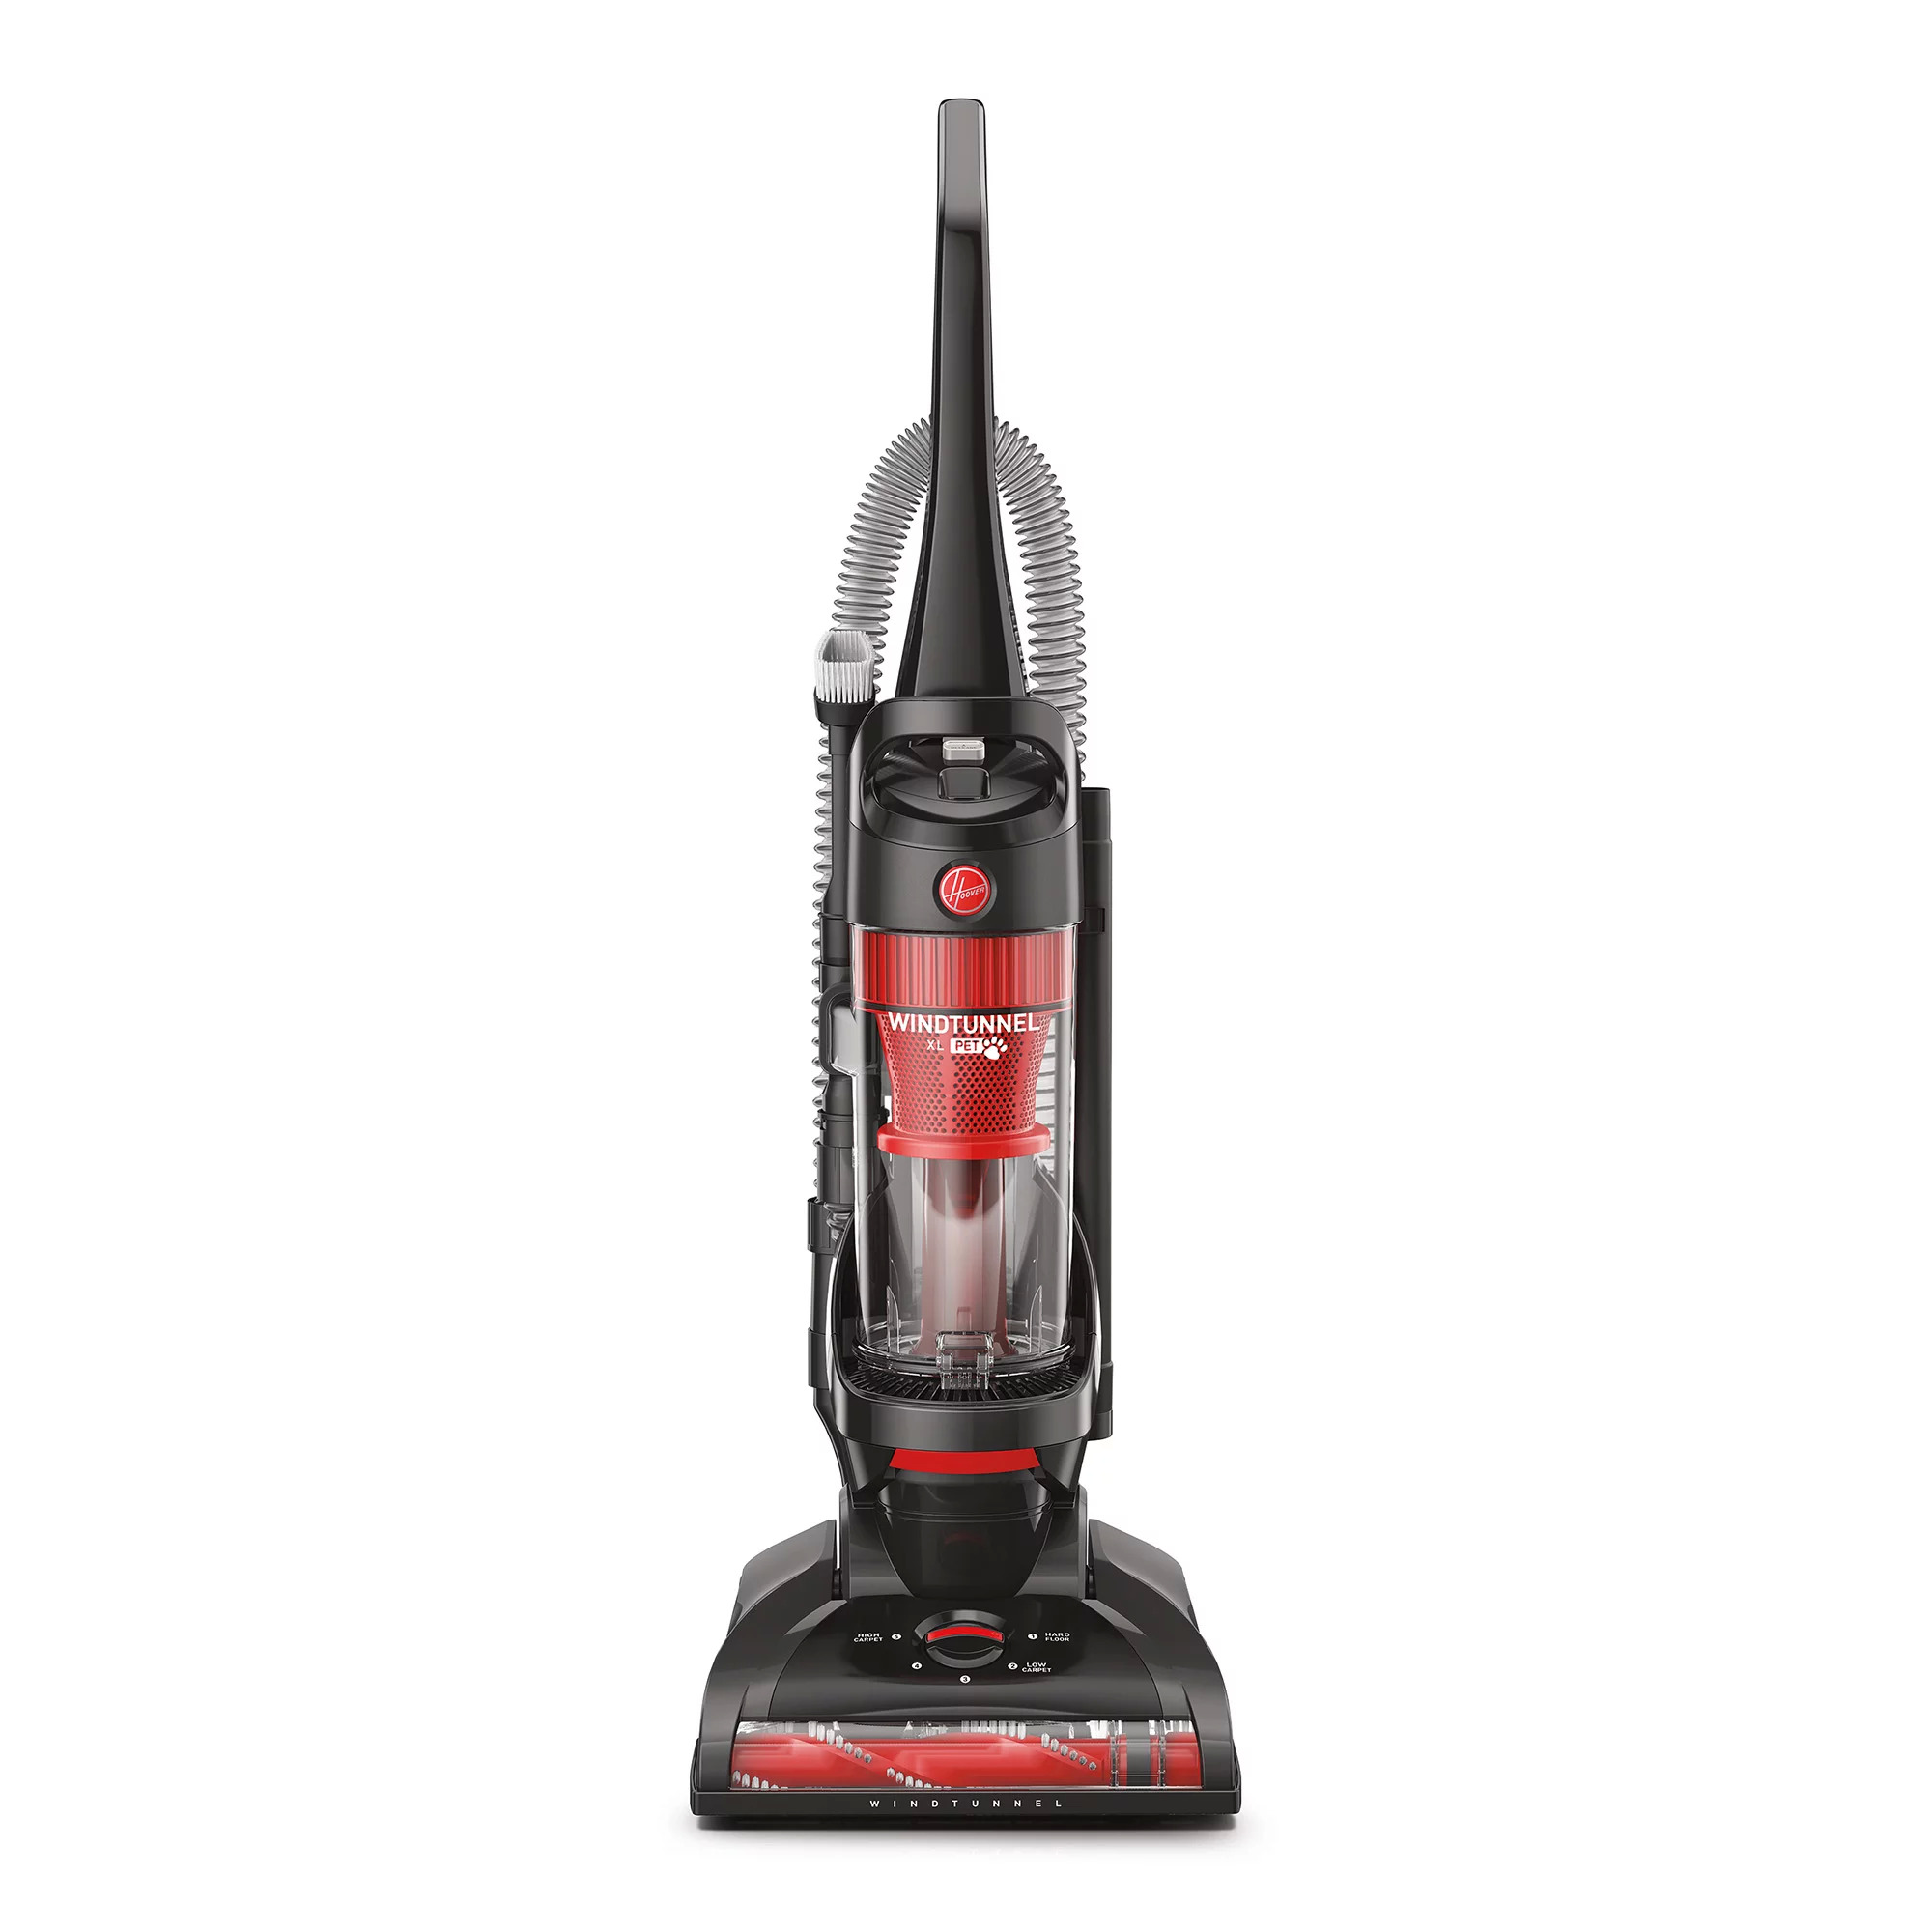 Hoover Wind Tunnel XL Pet Bagless Upright Vacuum $59 + Free Shipping